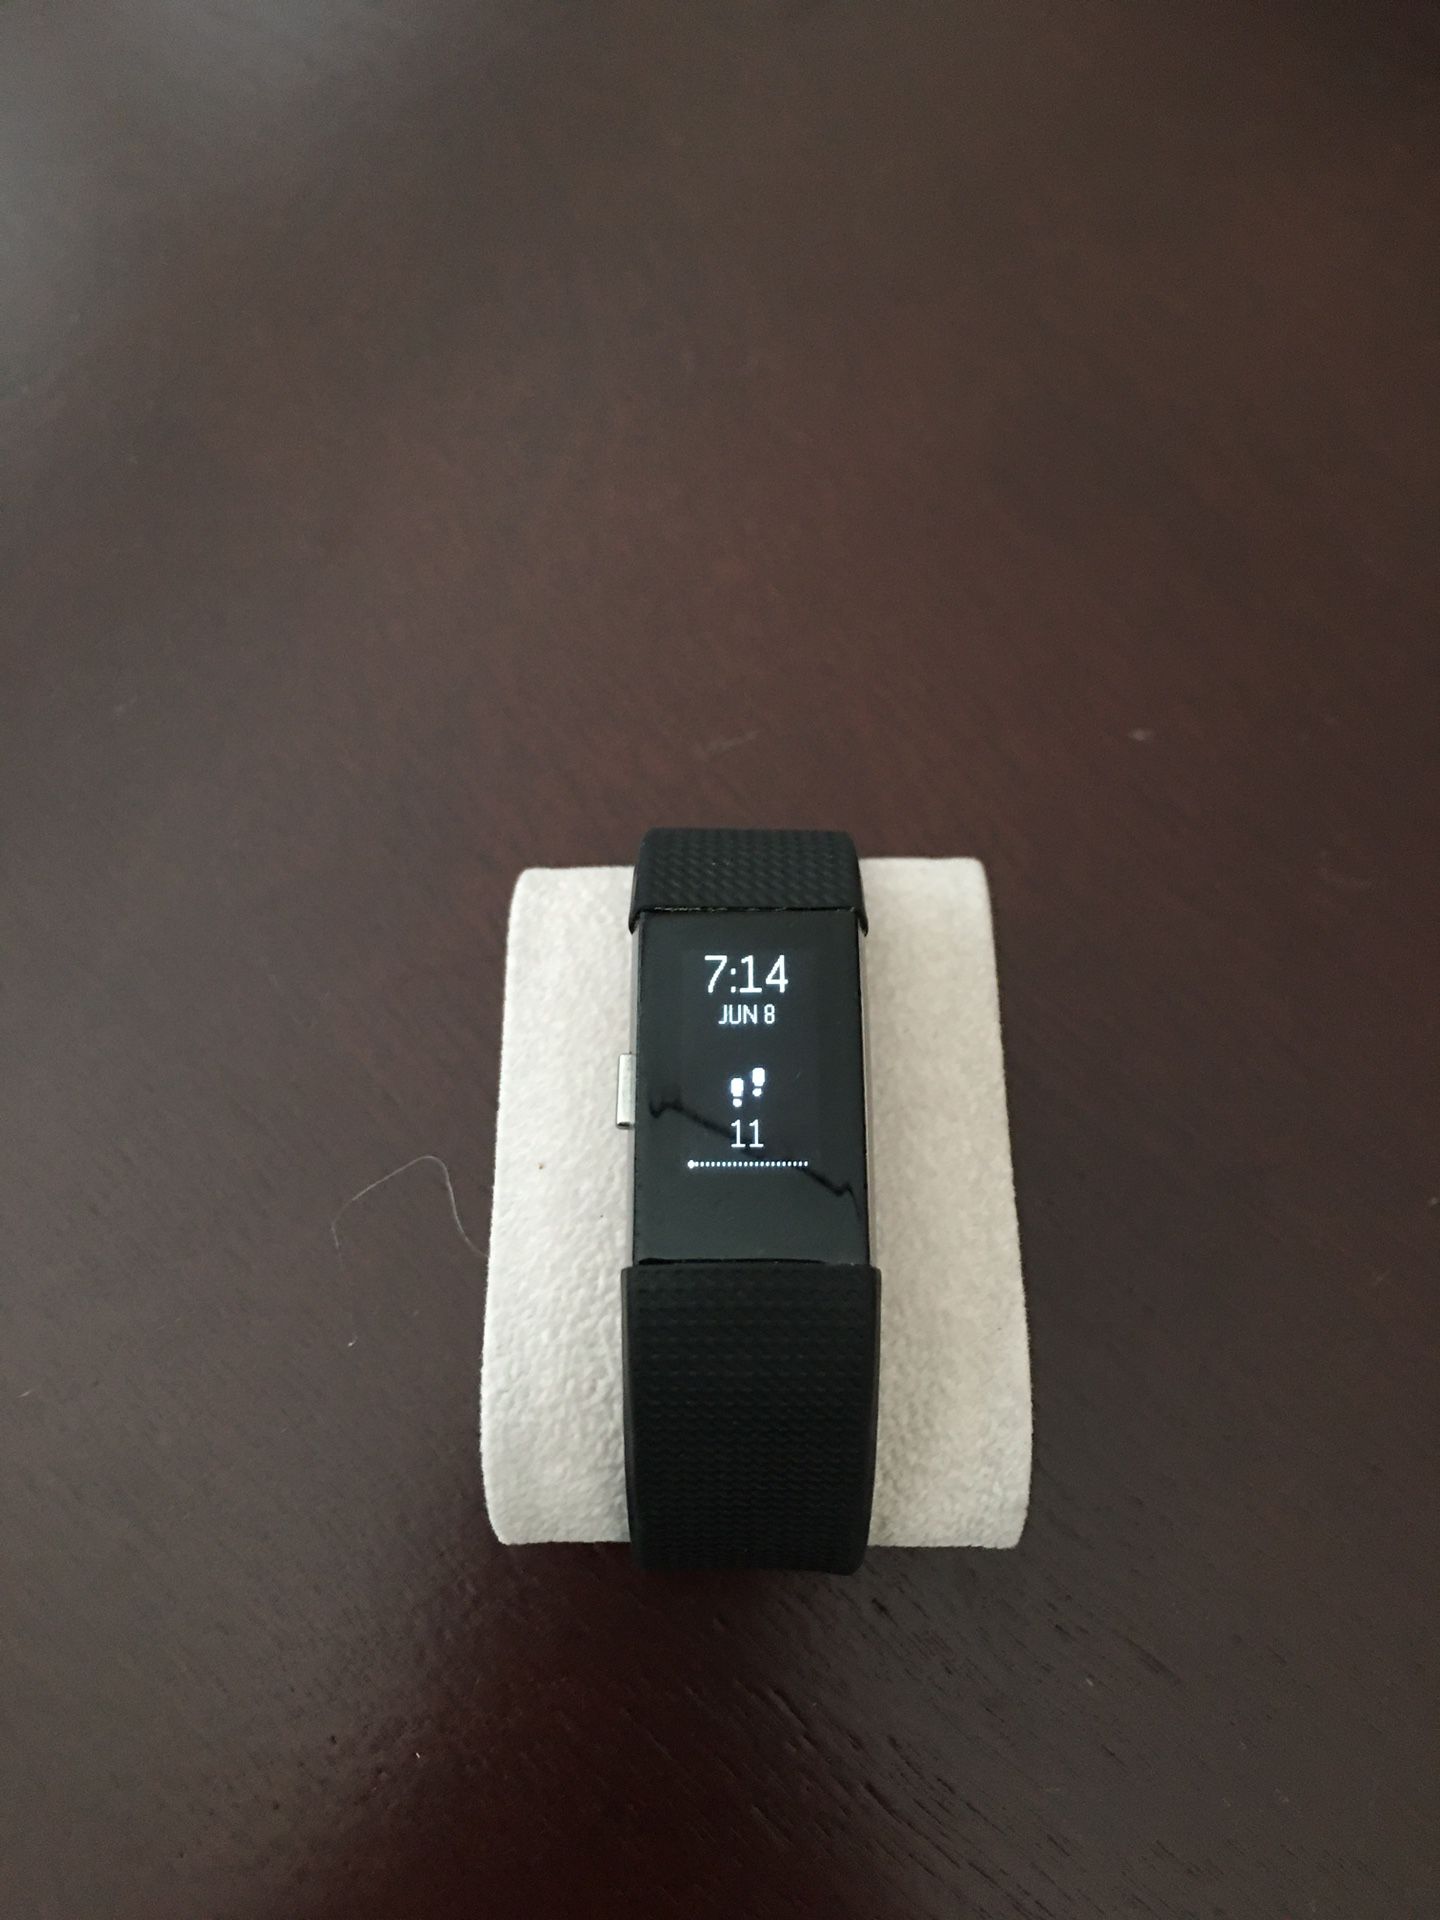 Fitbit Charge 2 with both original and custom bands